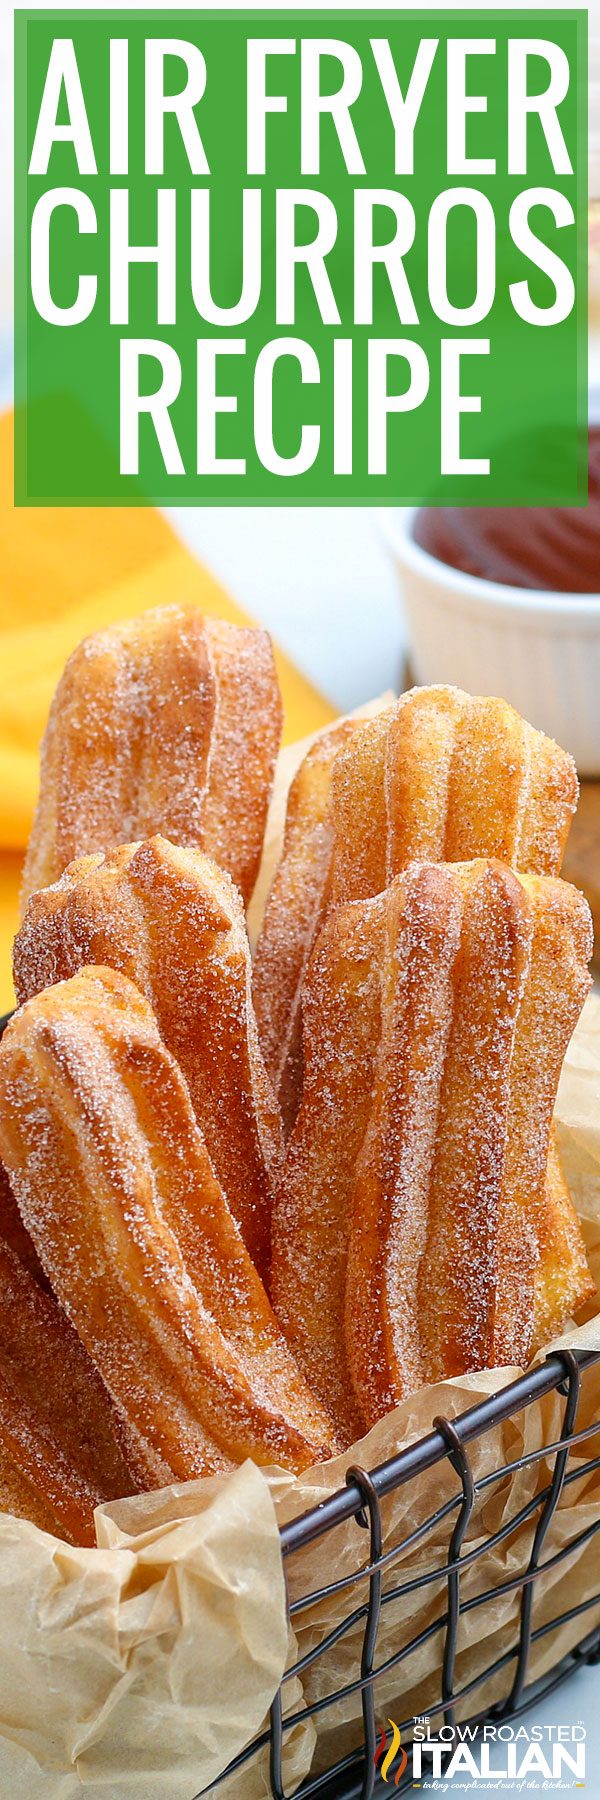 titled image for air fryer churros recipe